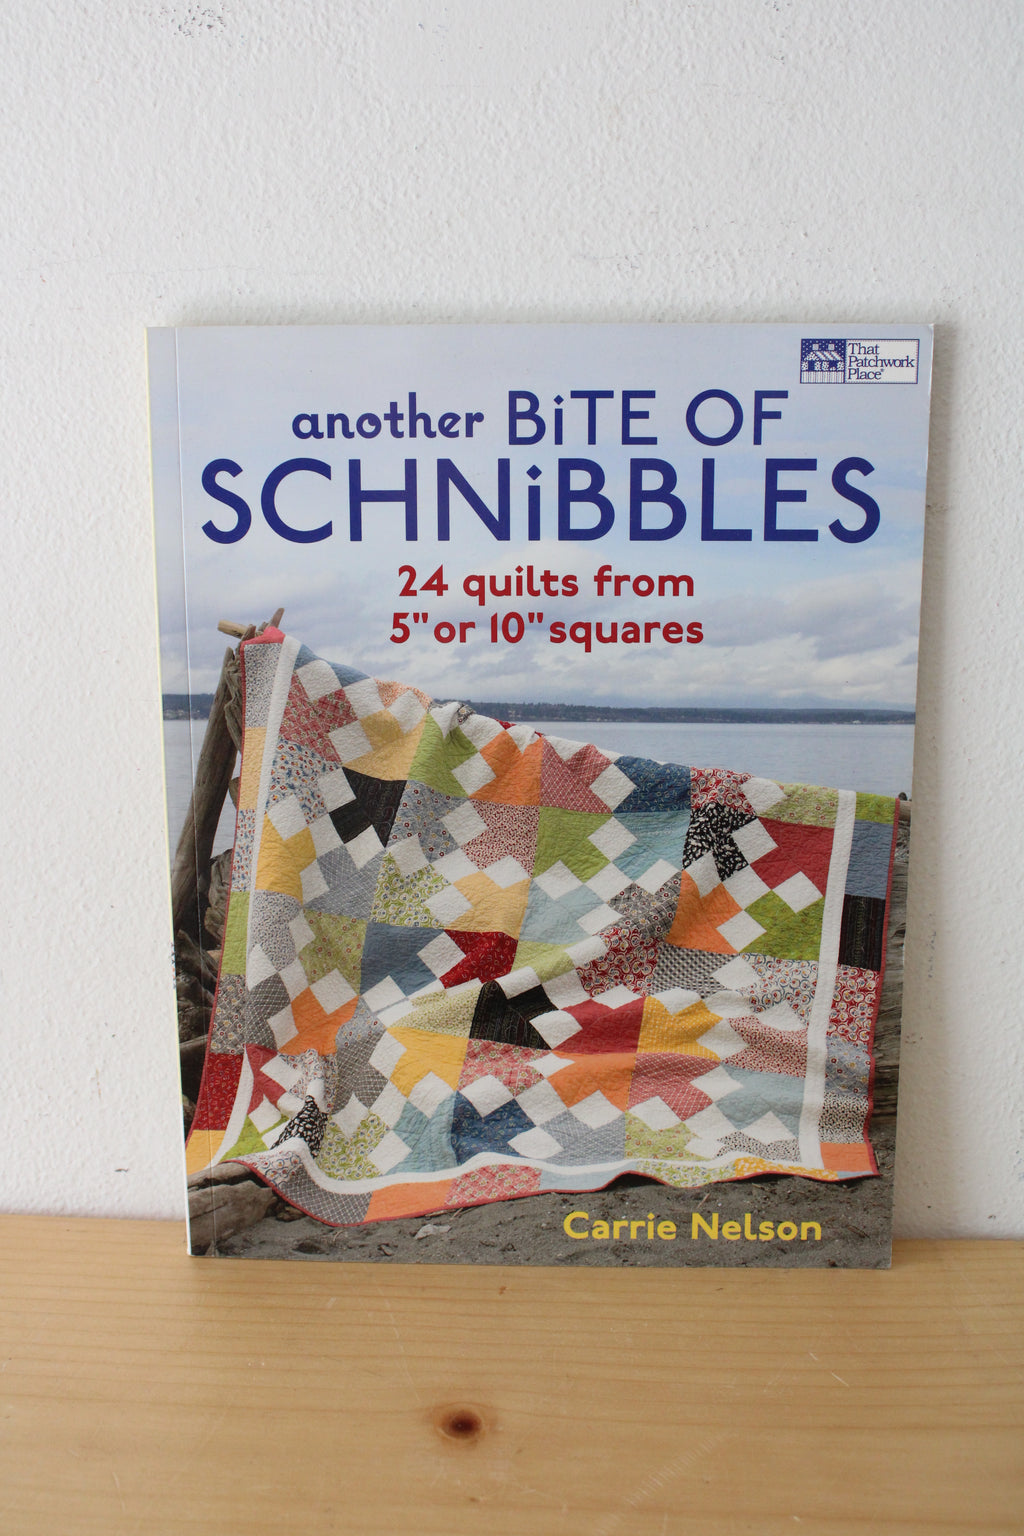 Another Bite Of Schnibbles 24 Quilts From 5" Or 10" Squares, By Carrie Nelson